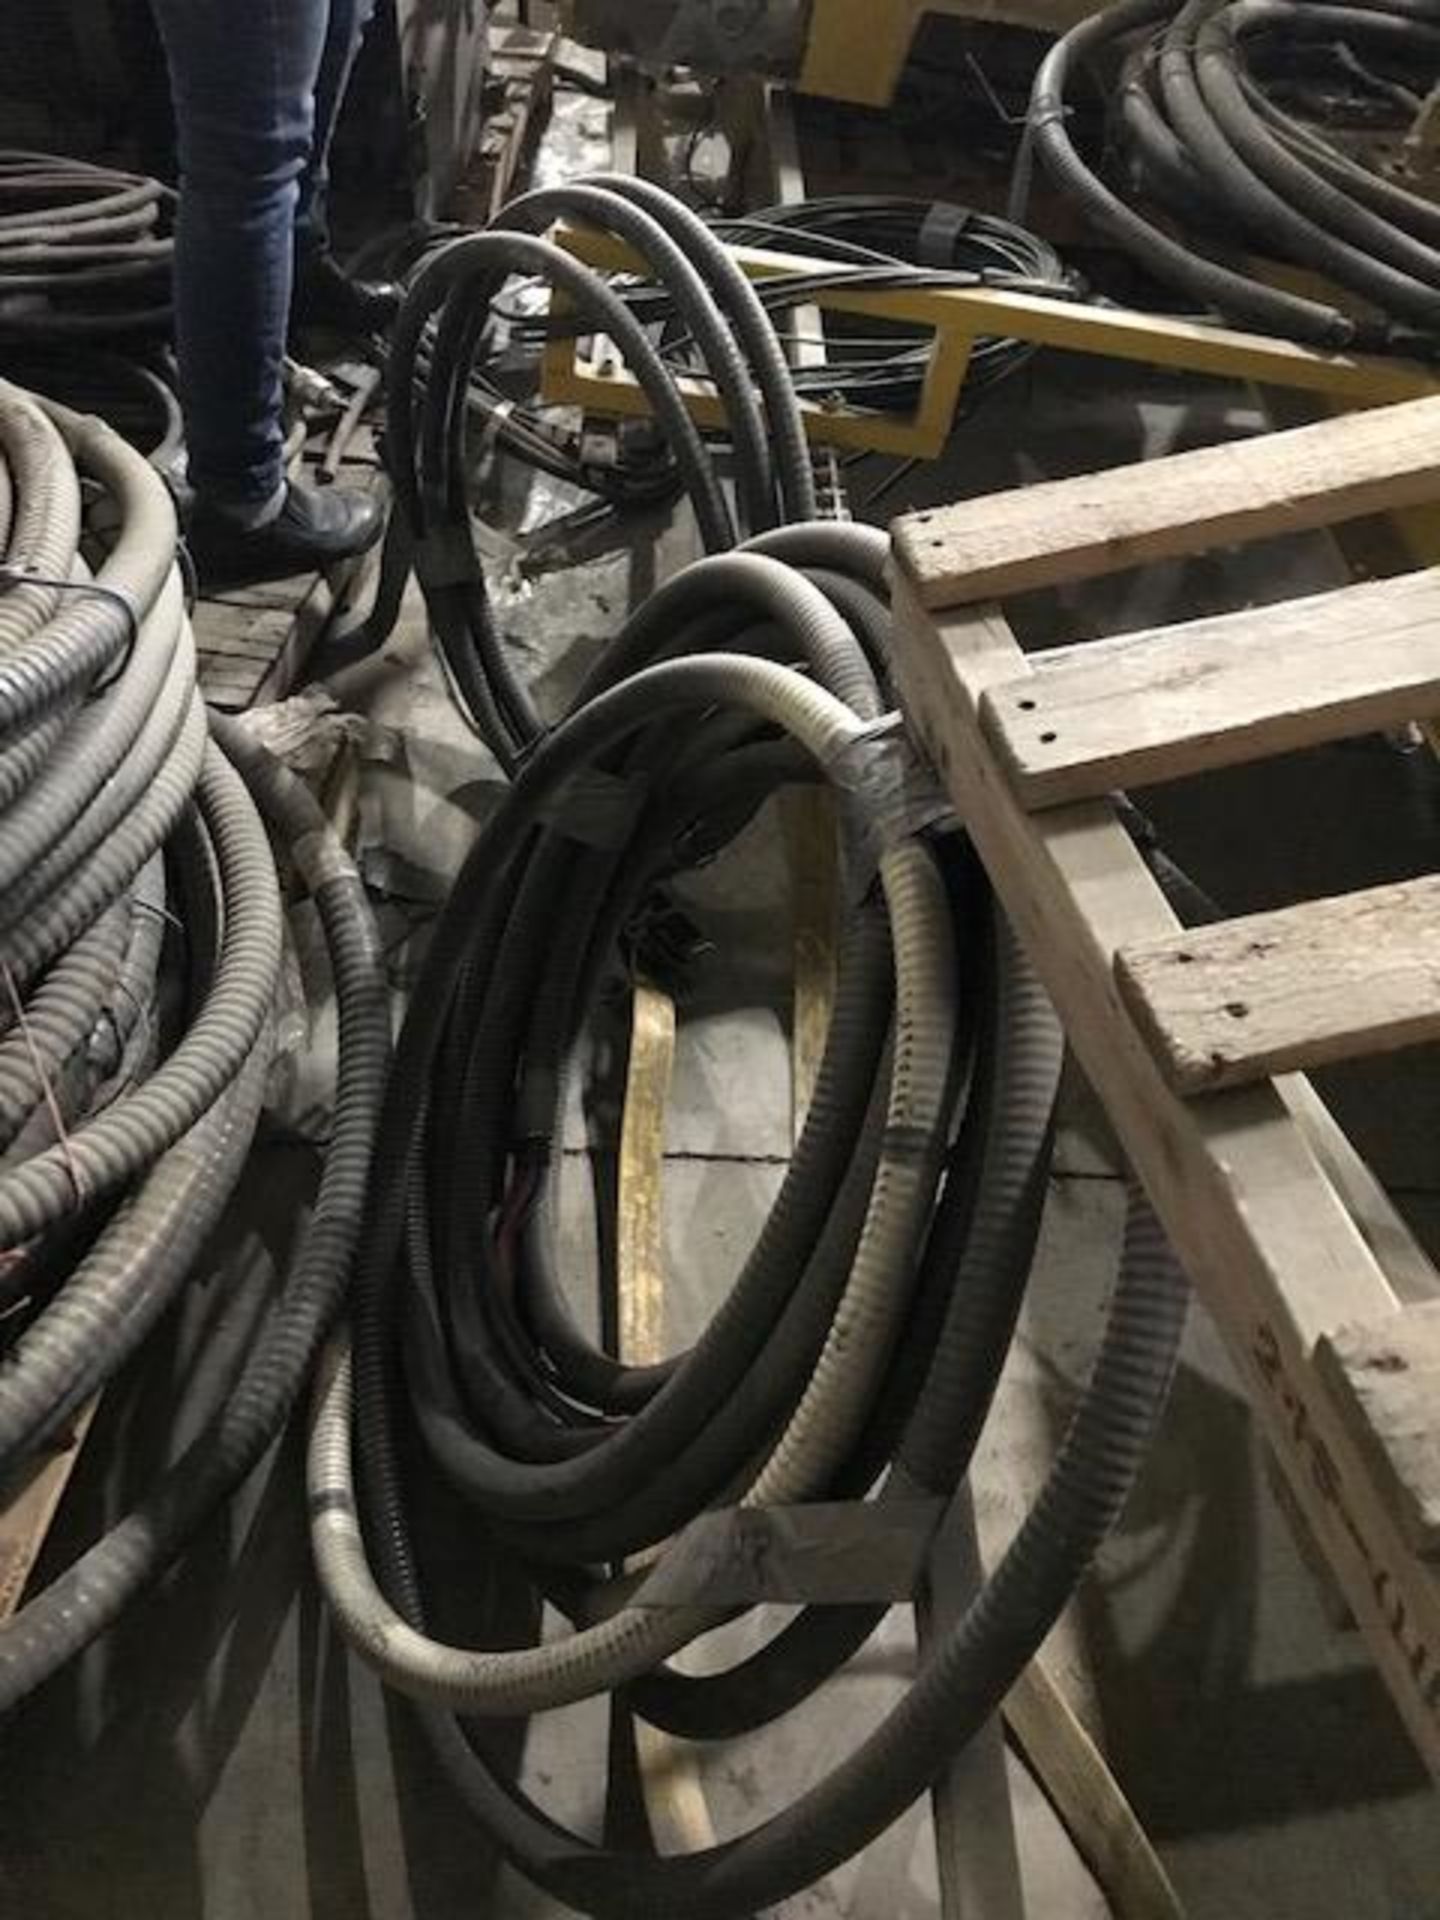 LOT ASSORTED 600VOLTS AND 1000VOLTS TECH WIRES APPROX. 2240 TOTAL - Image 2 of 5